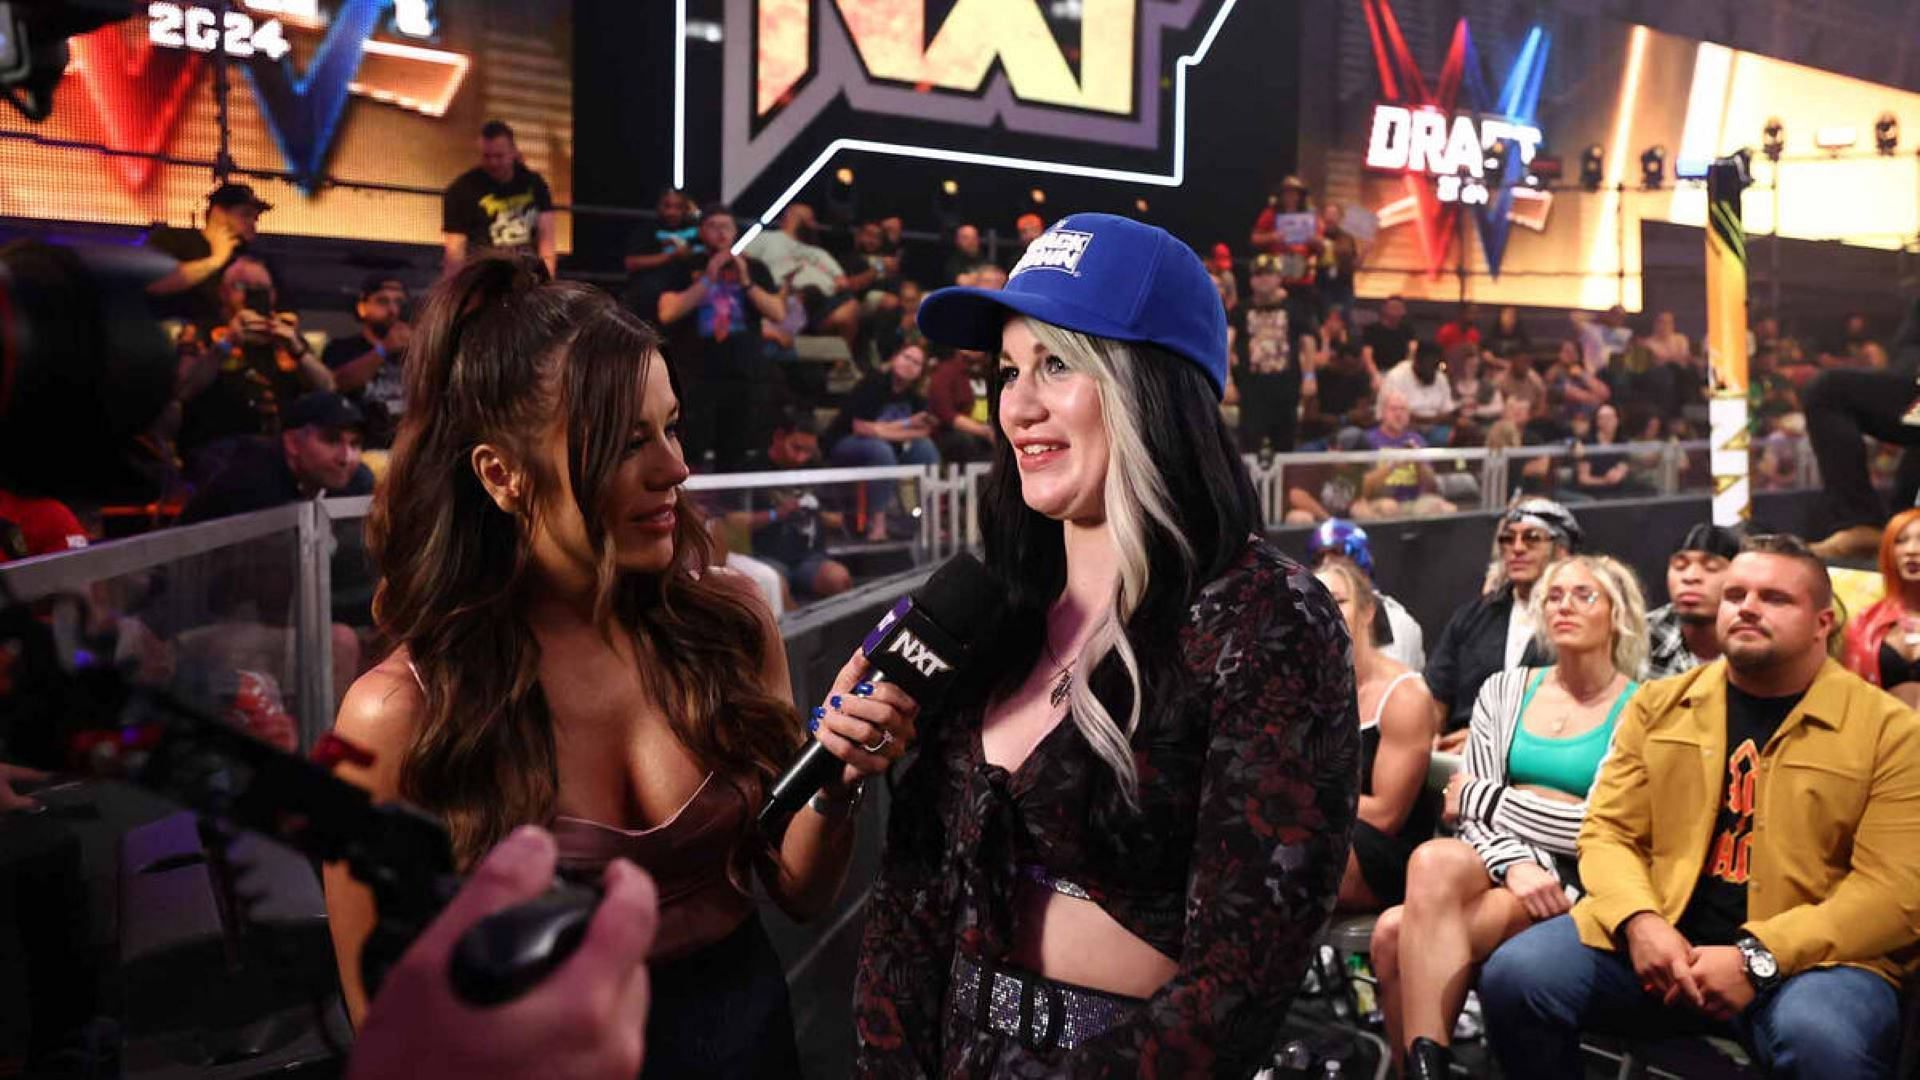 Blair Davenport was the only woman from NXT to be drafted by SmackDown.